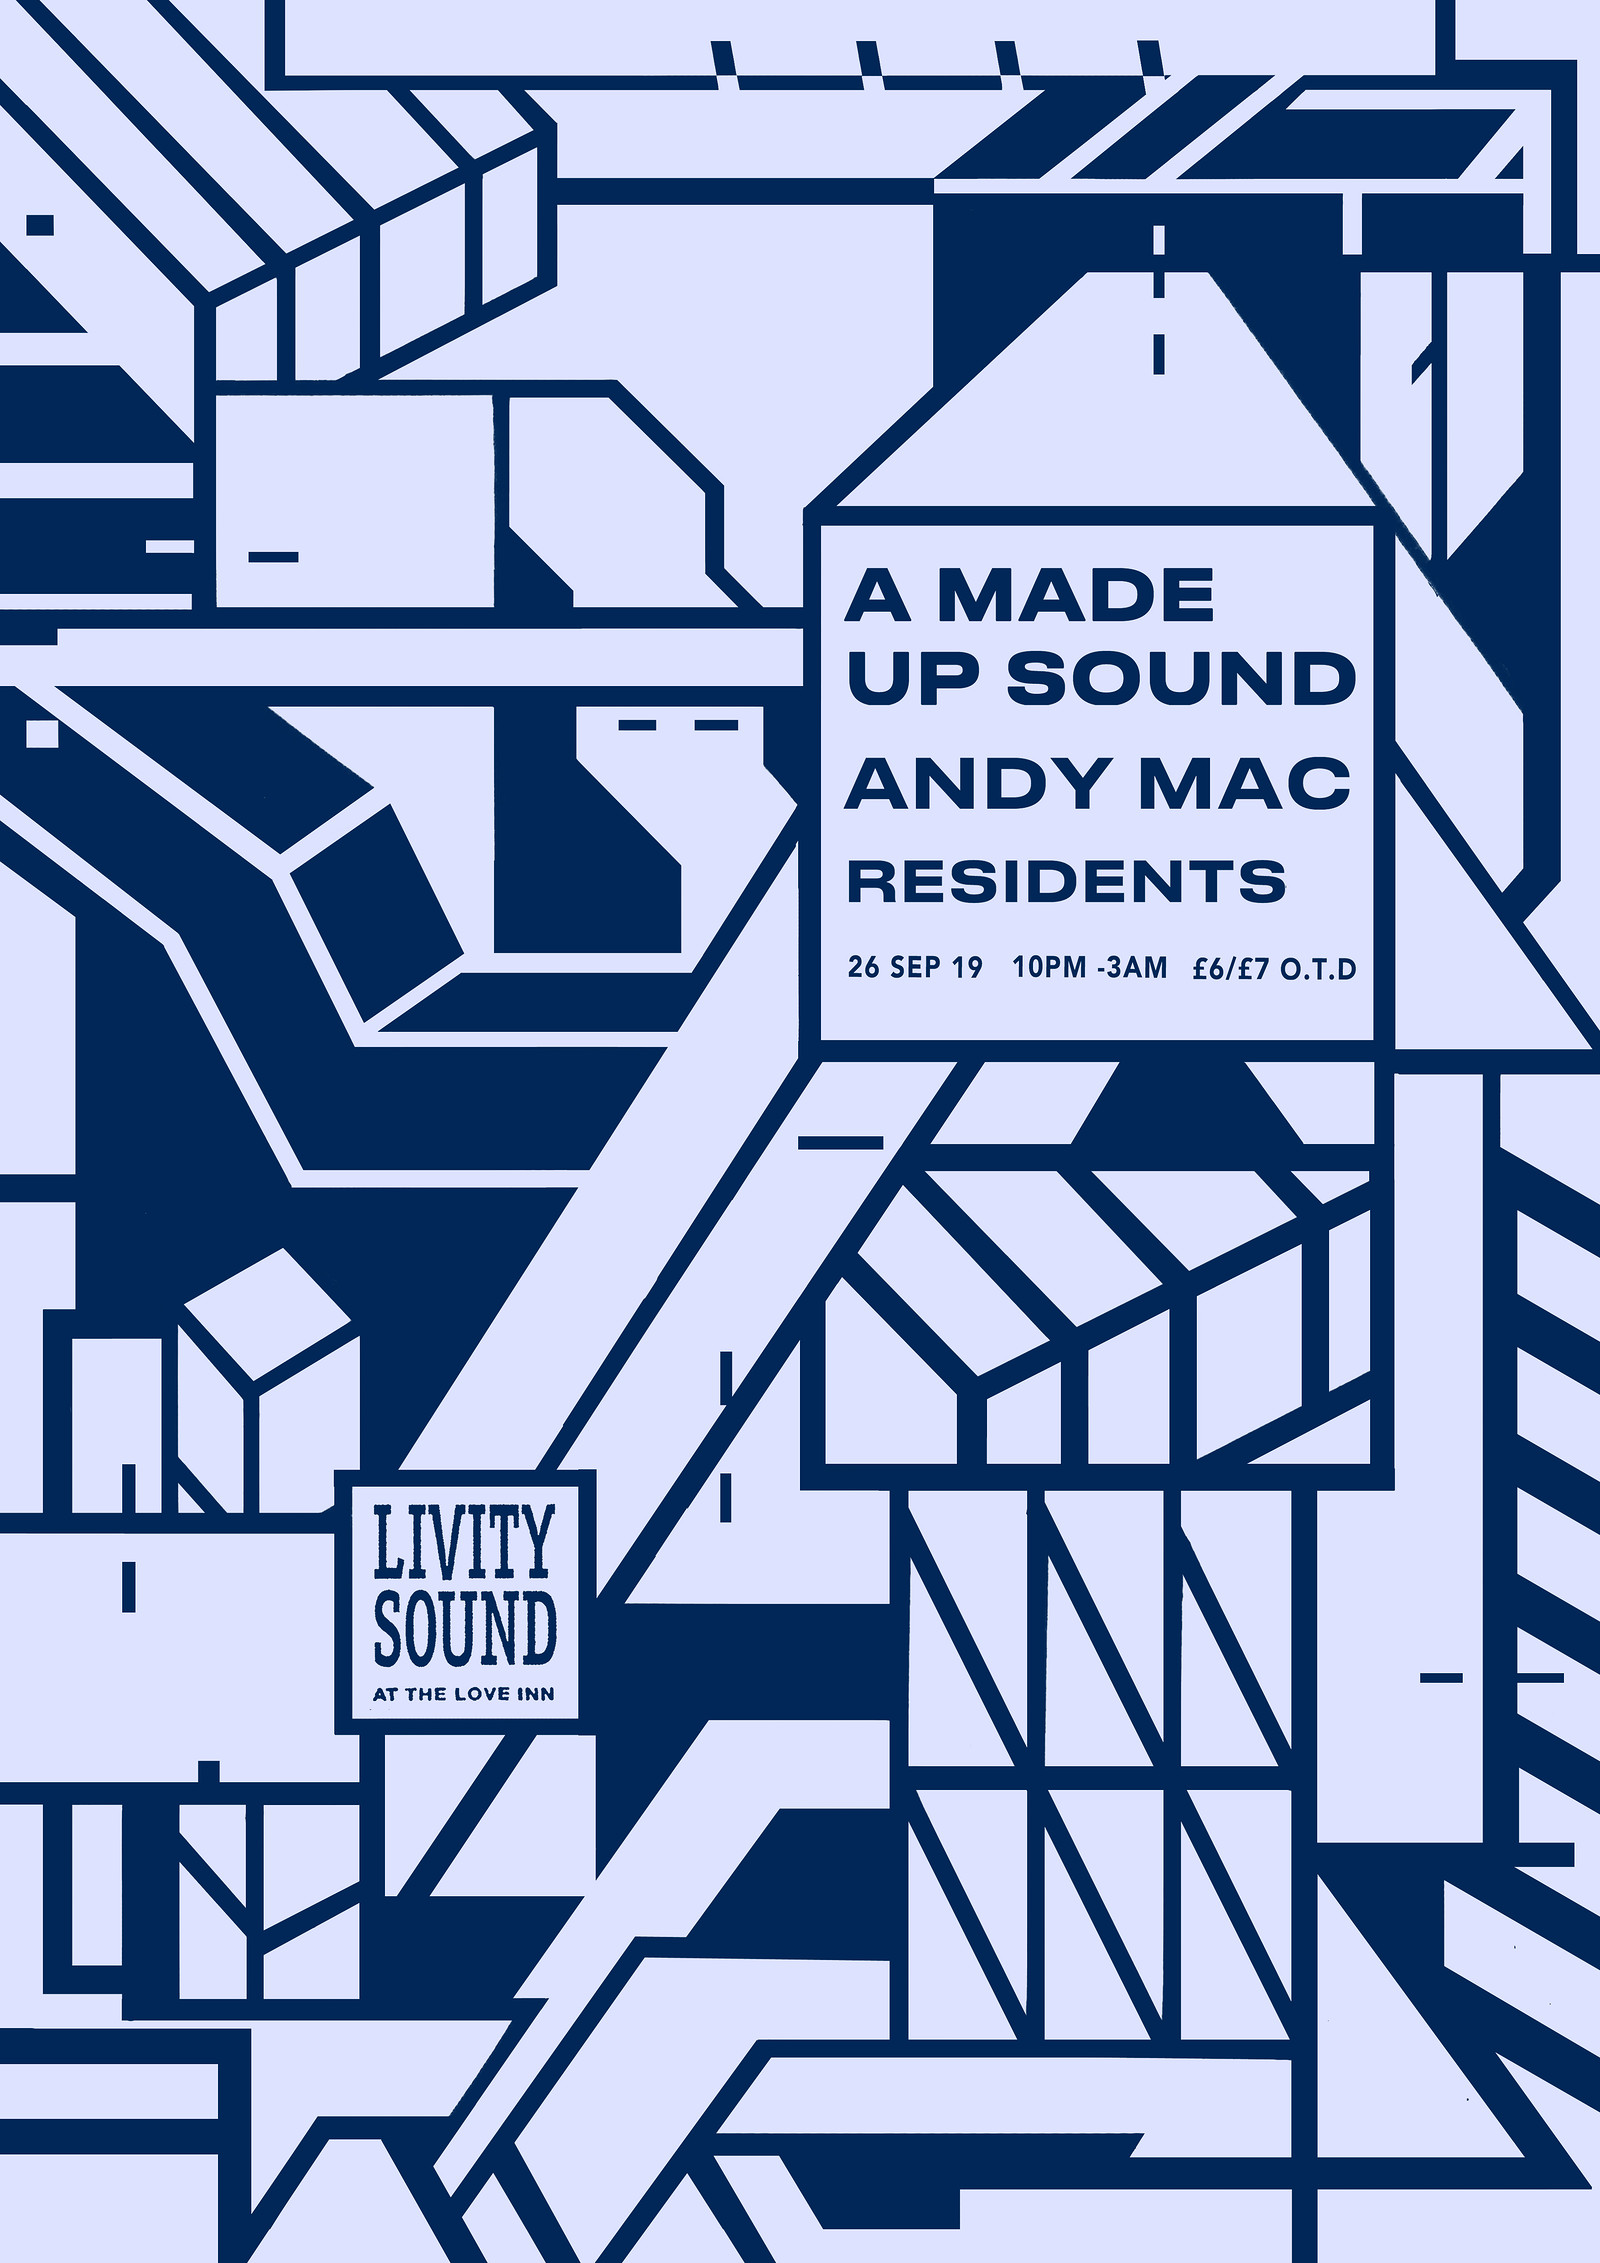 Livity Sound w/ A Made Up Sound & Andy Mac at The Love Inn